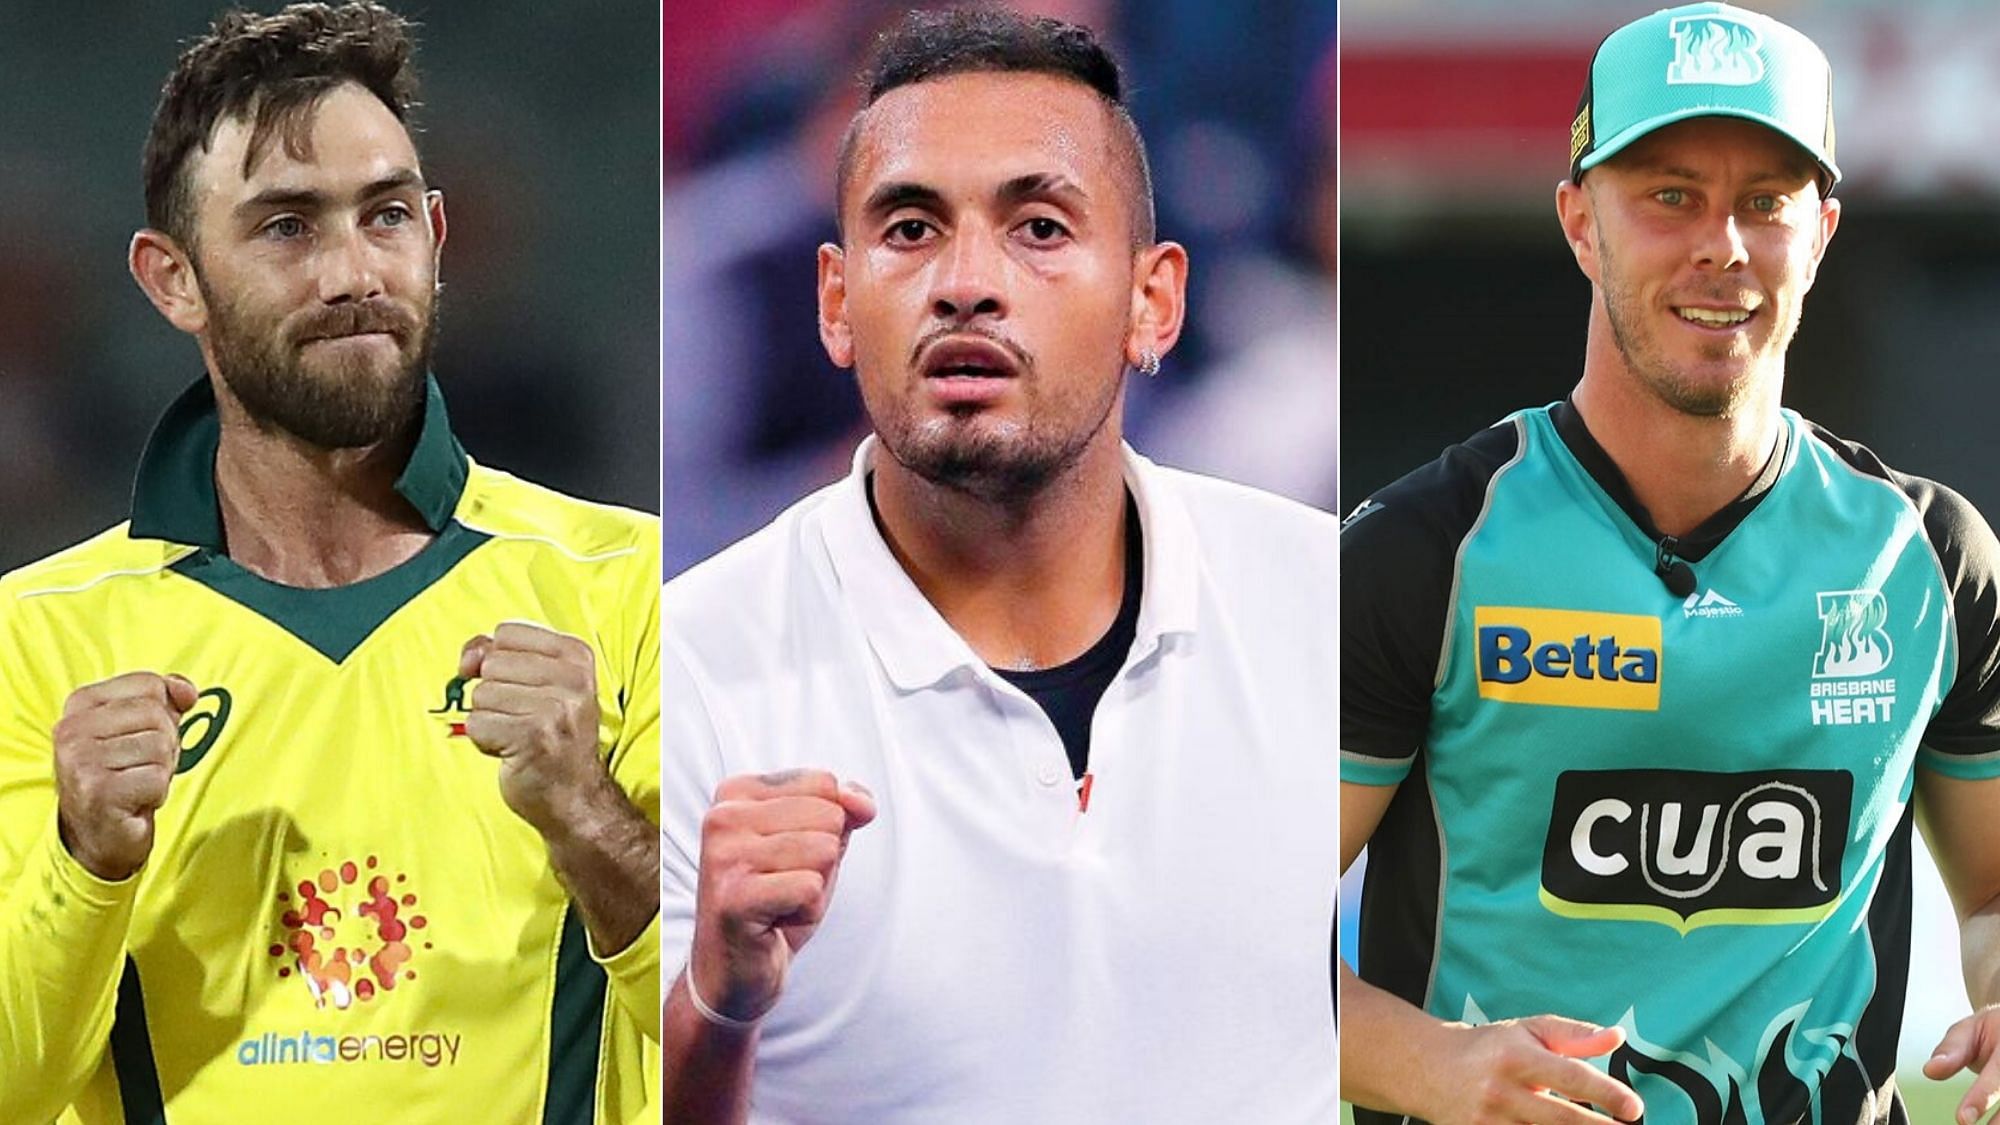 Cricket and tennis stars spearheaded by Nick Kyrgios and Chris Lynn on Friday pledged support for victims of bushfires raging around Australia, donating cash for every ace or six they hit.